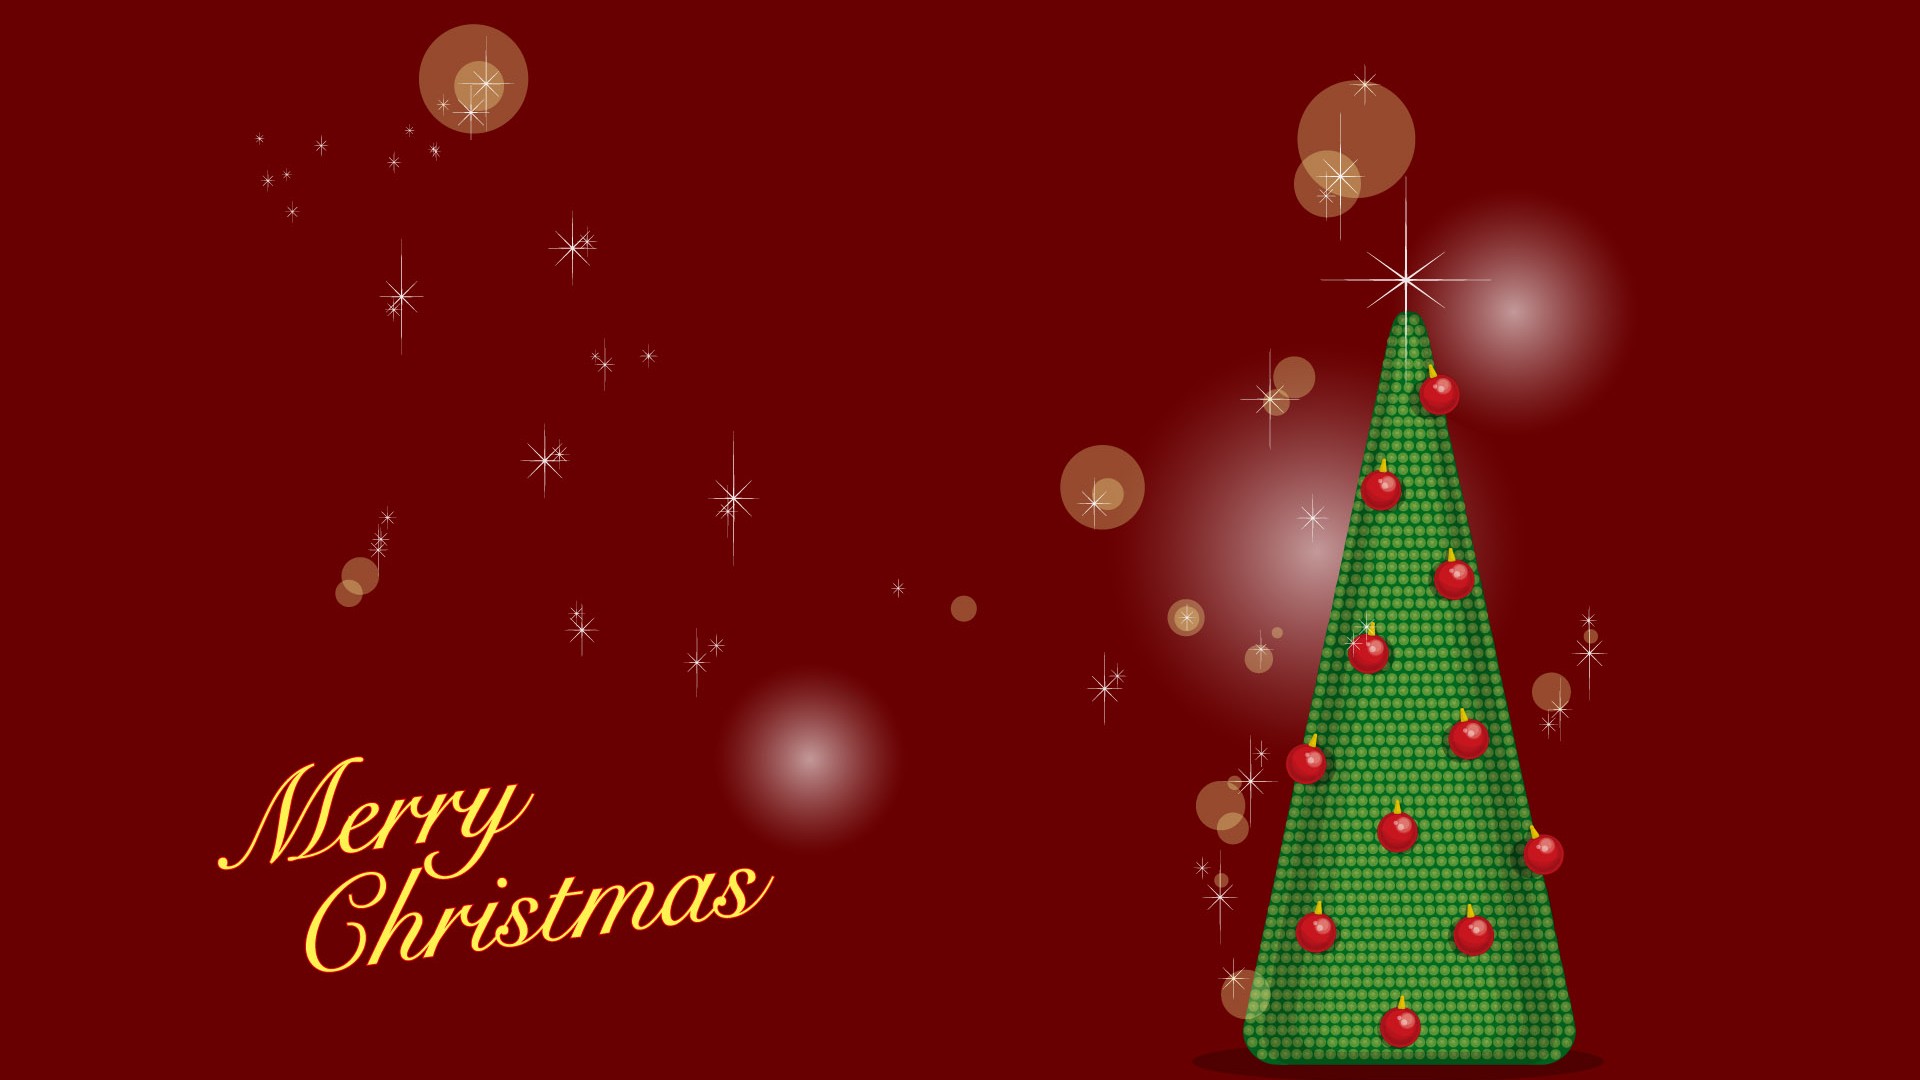 Exquisite Christmas Theme HD Wallpapers #21 - 1920x1080